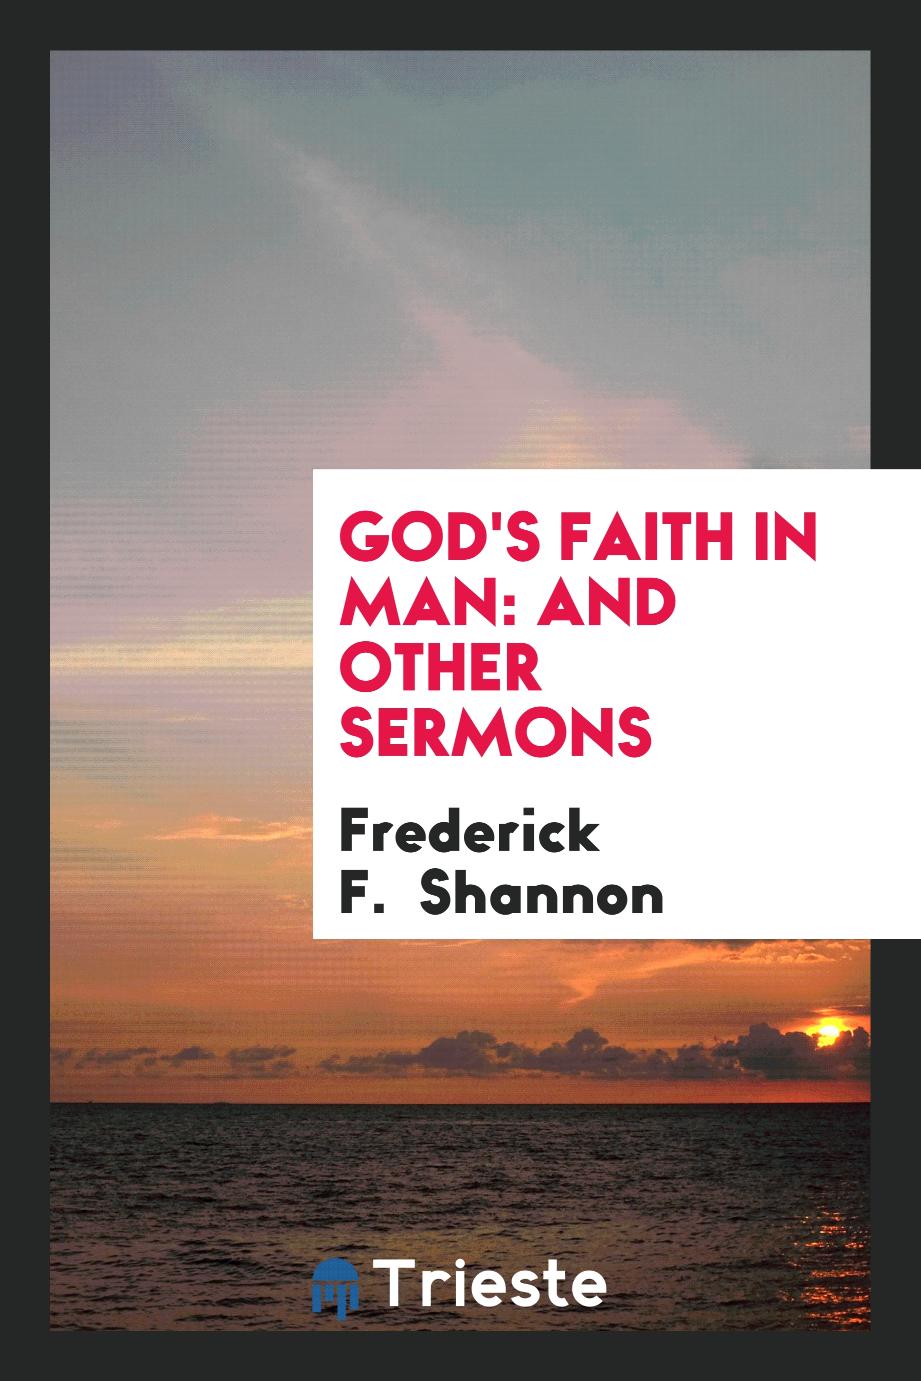 God's Faith in Man: And Other Sermons